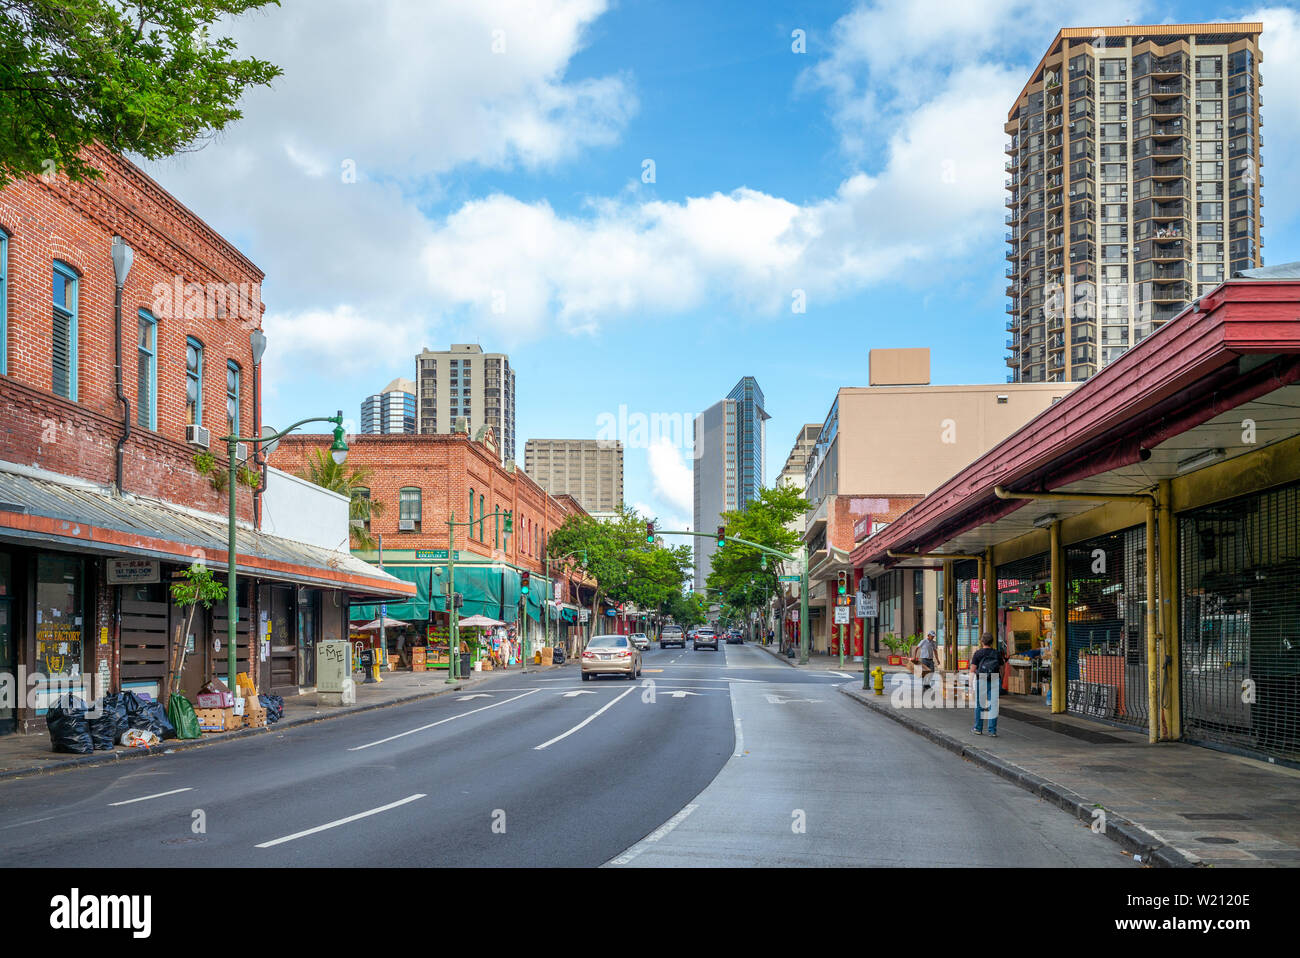 Honolulu, US - June 19, 2019: Street view of Chinatown in Hawaii. Laborers were imported from China to work on sugar plantations then moved to this ar Stock Photo